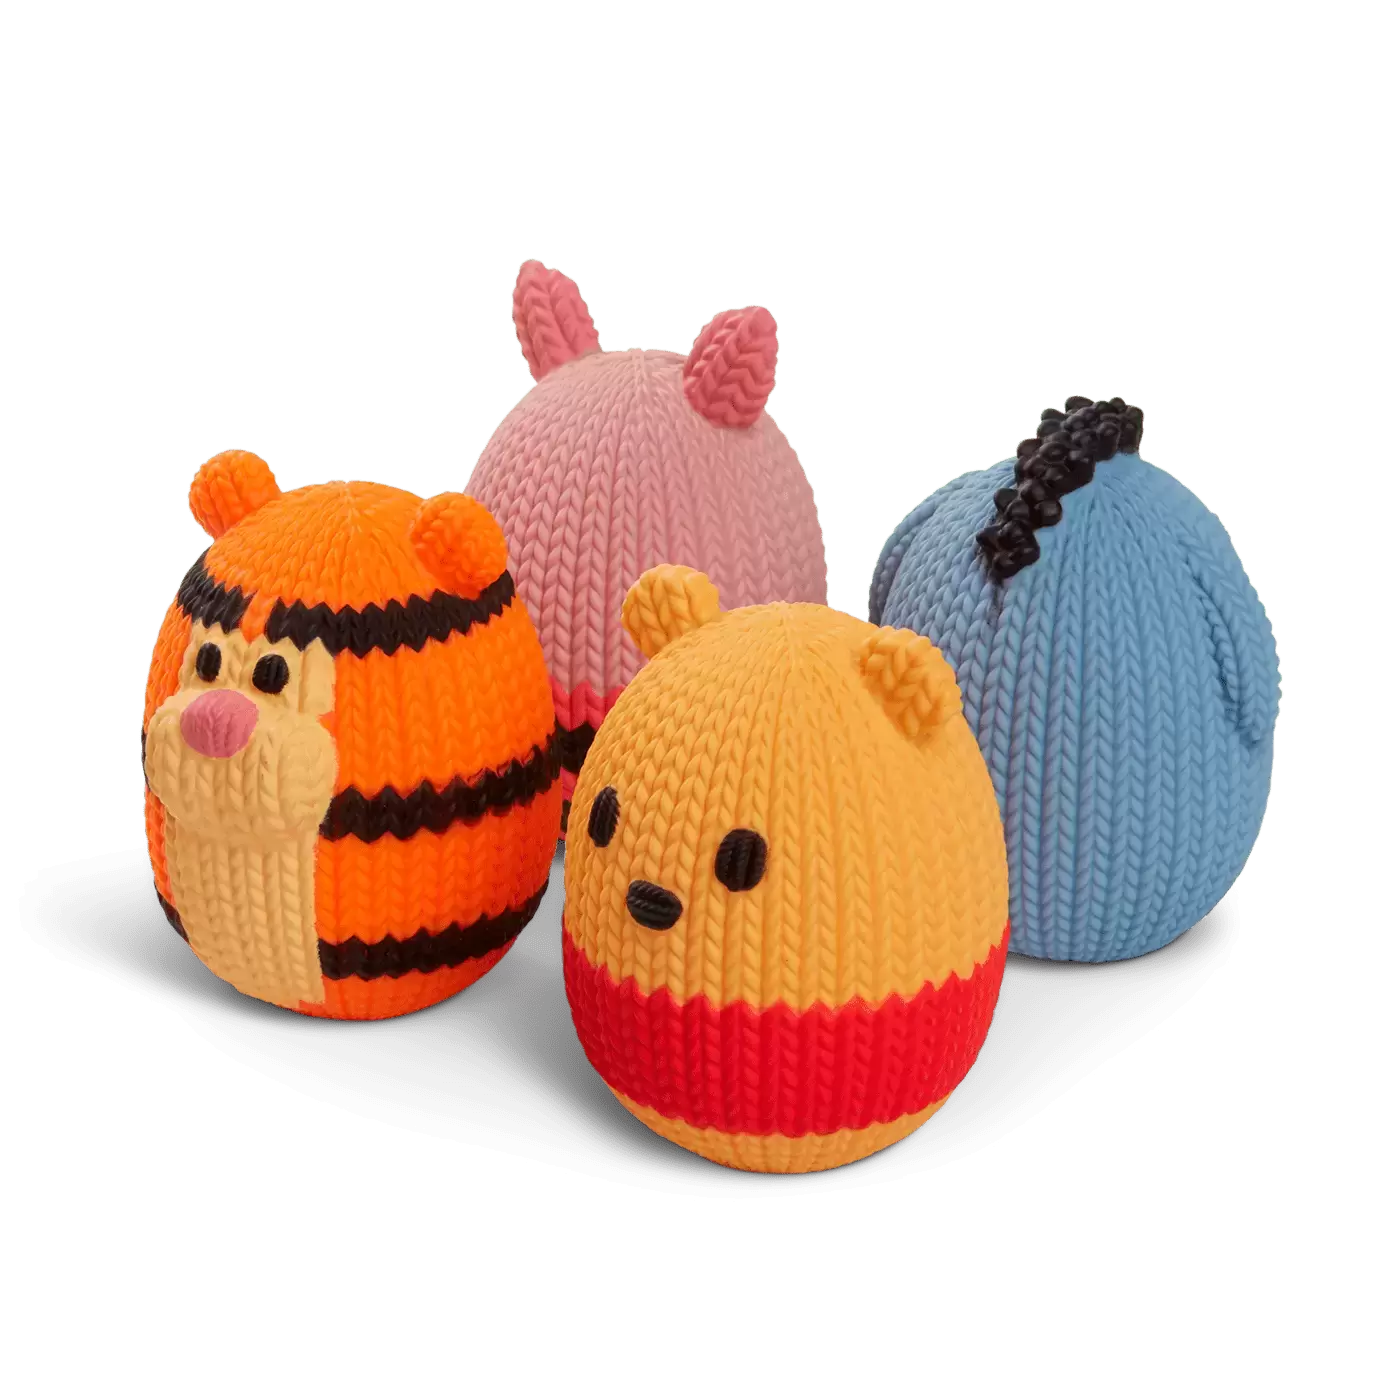 Handmade By Robots - Winnie the Pooh set of 4 Minis